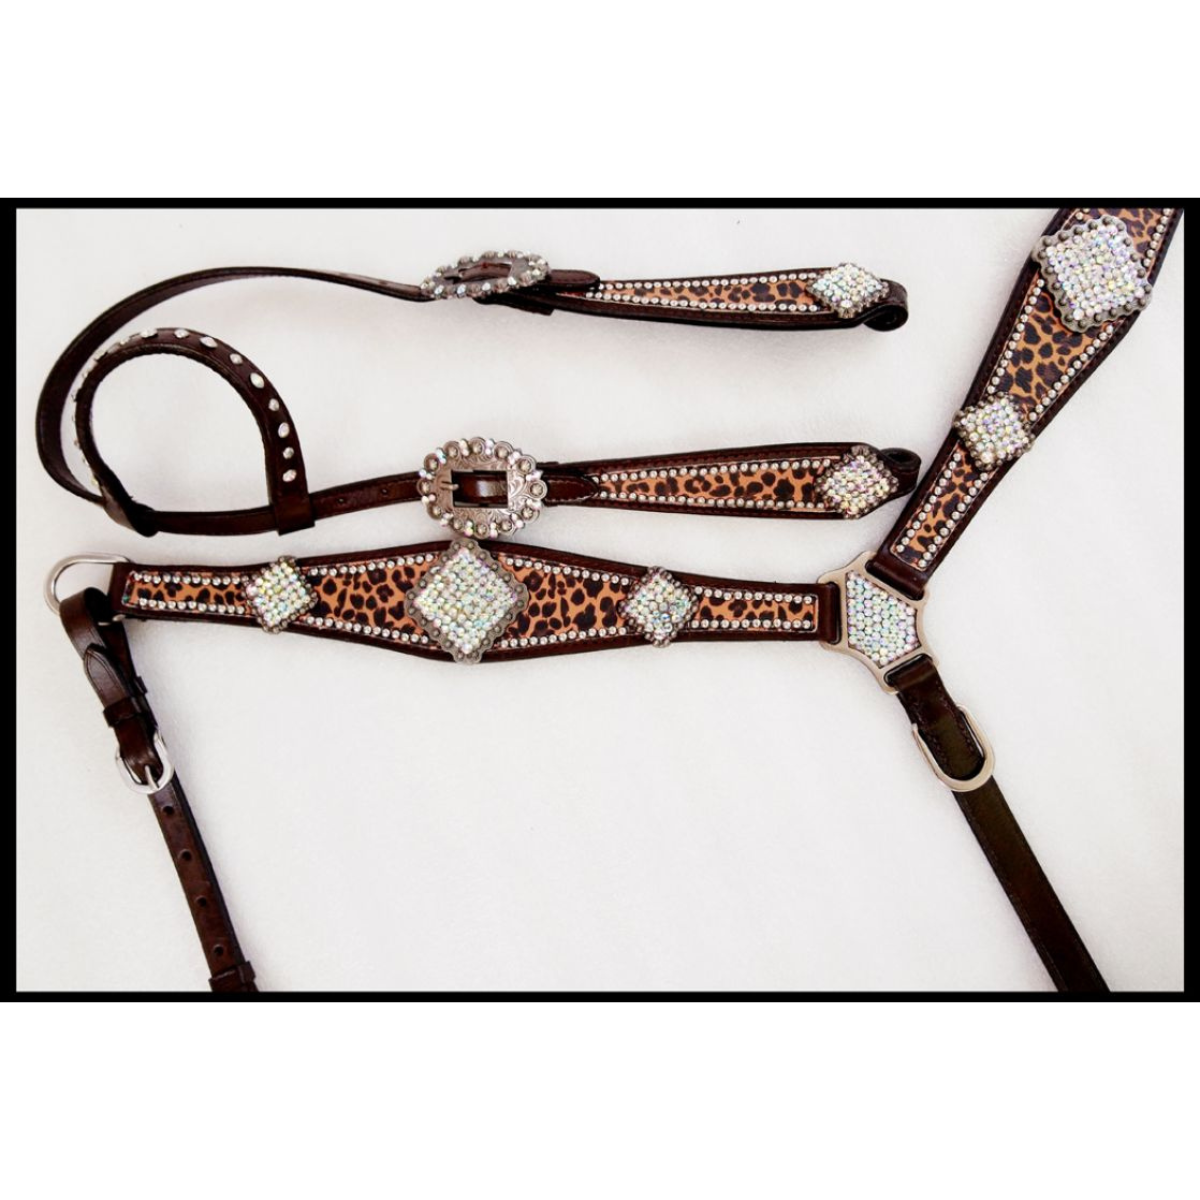 Showman ® Cheetah print one ear headstall and breast collar set with rhinestone accents. - Double T Saddles